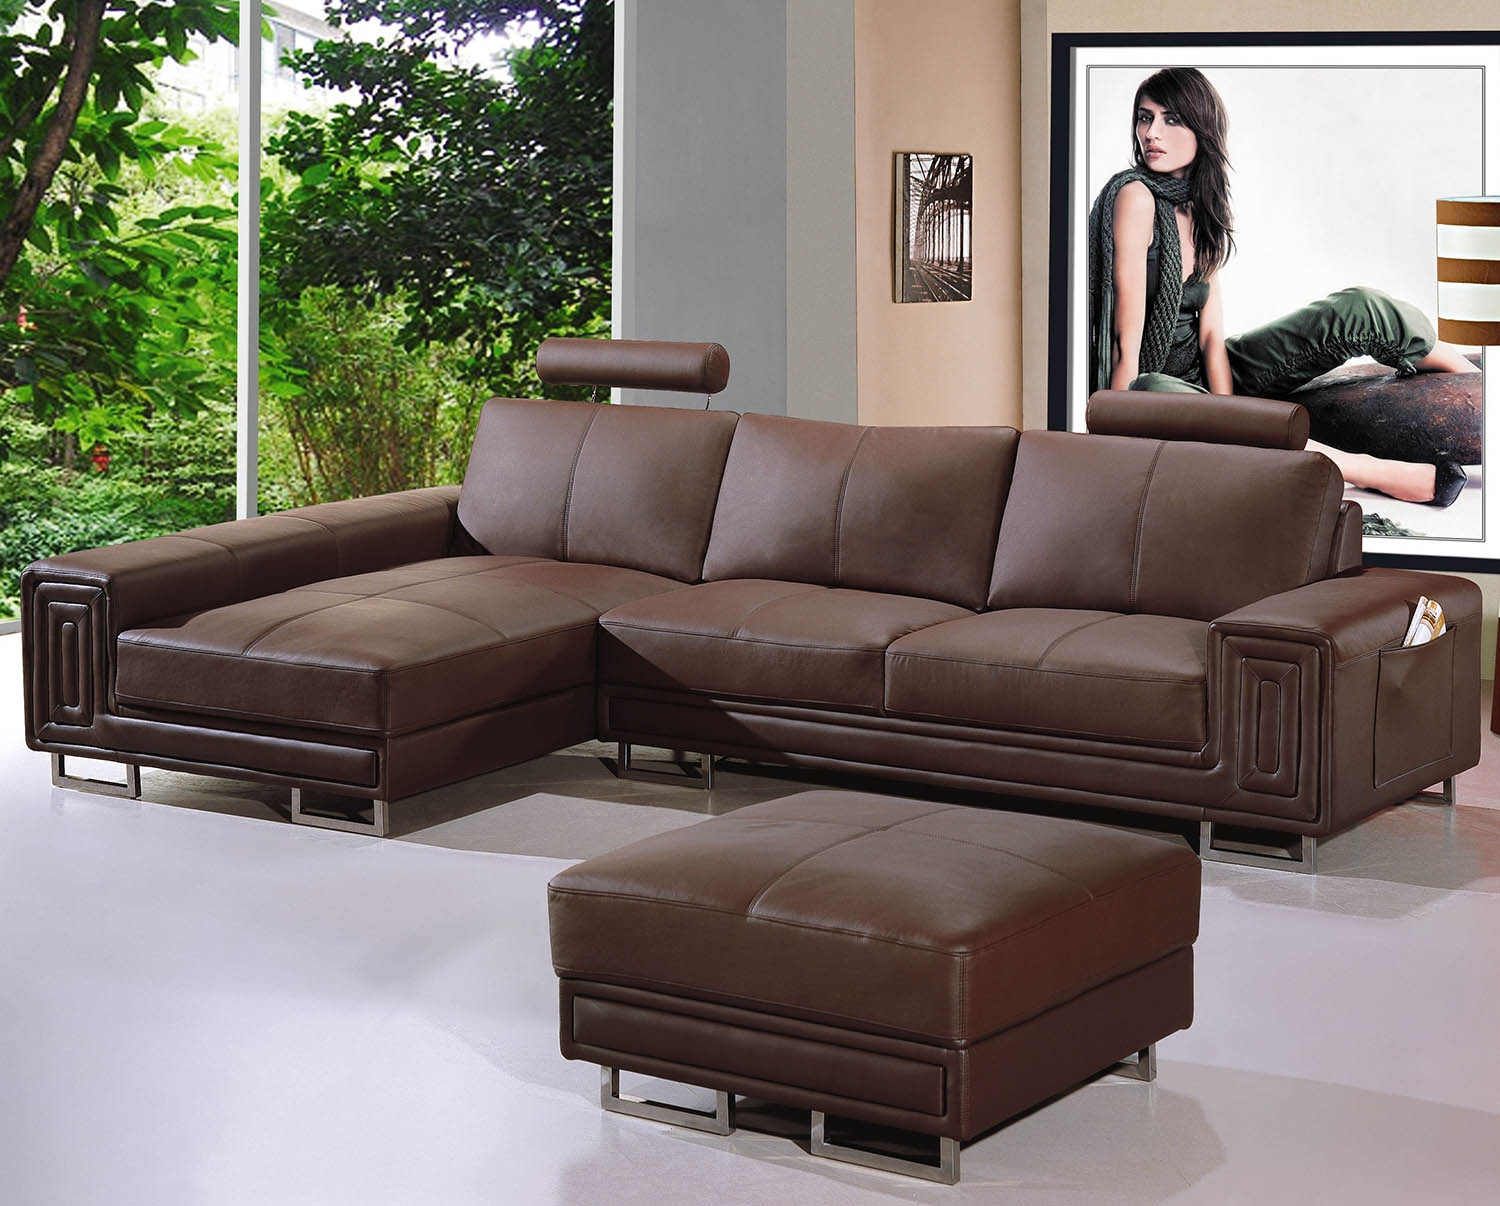 Canape Angle Cuir Marron Deco In Paris Canape Cuir D Angle Marron Tetieres Relax